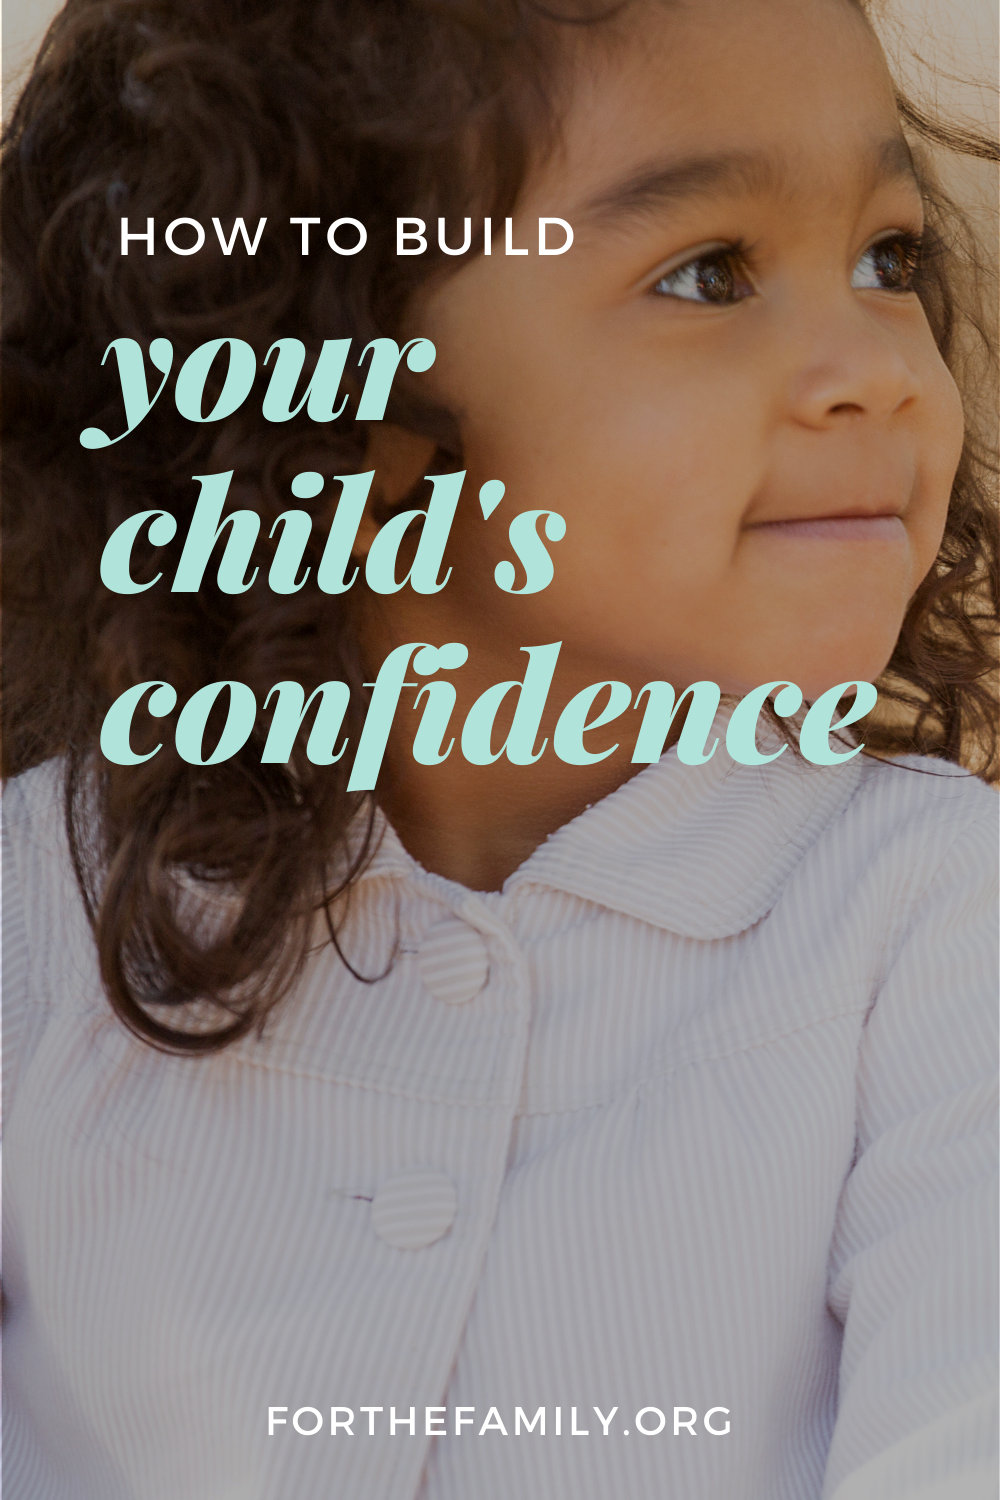 How to Build Your Child’s Confidence